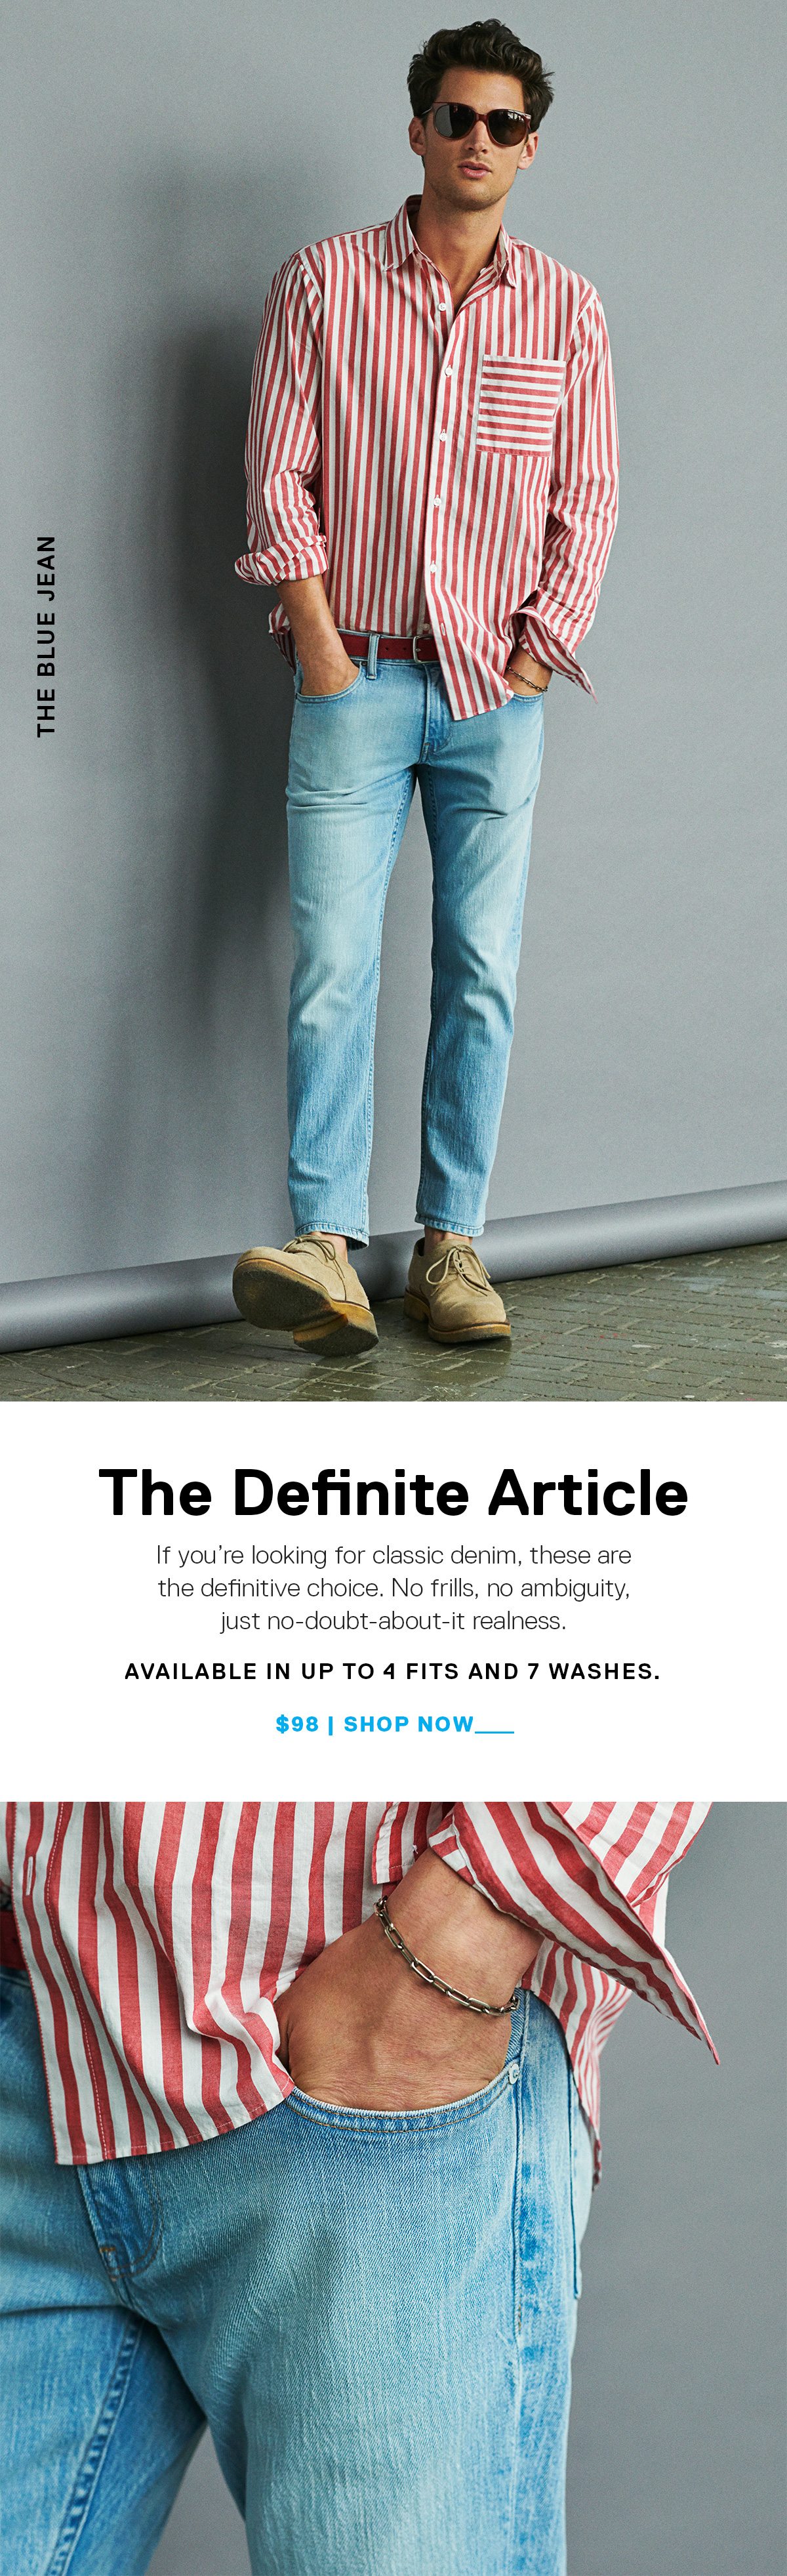 The Definite Article // If you’re looking for classic denim, these are the definitive choice. No frills, no ambiguity, just no-doubt-about-it realness. SHOP NOW →